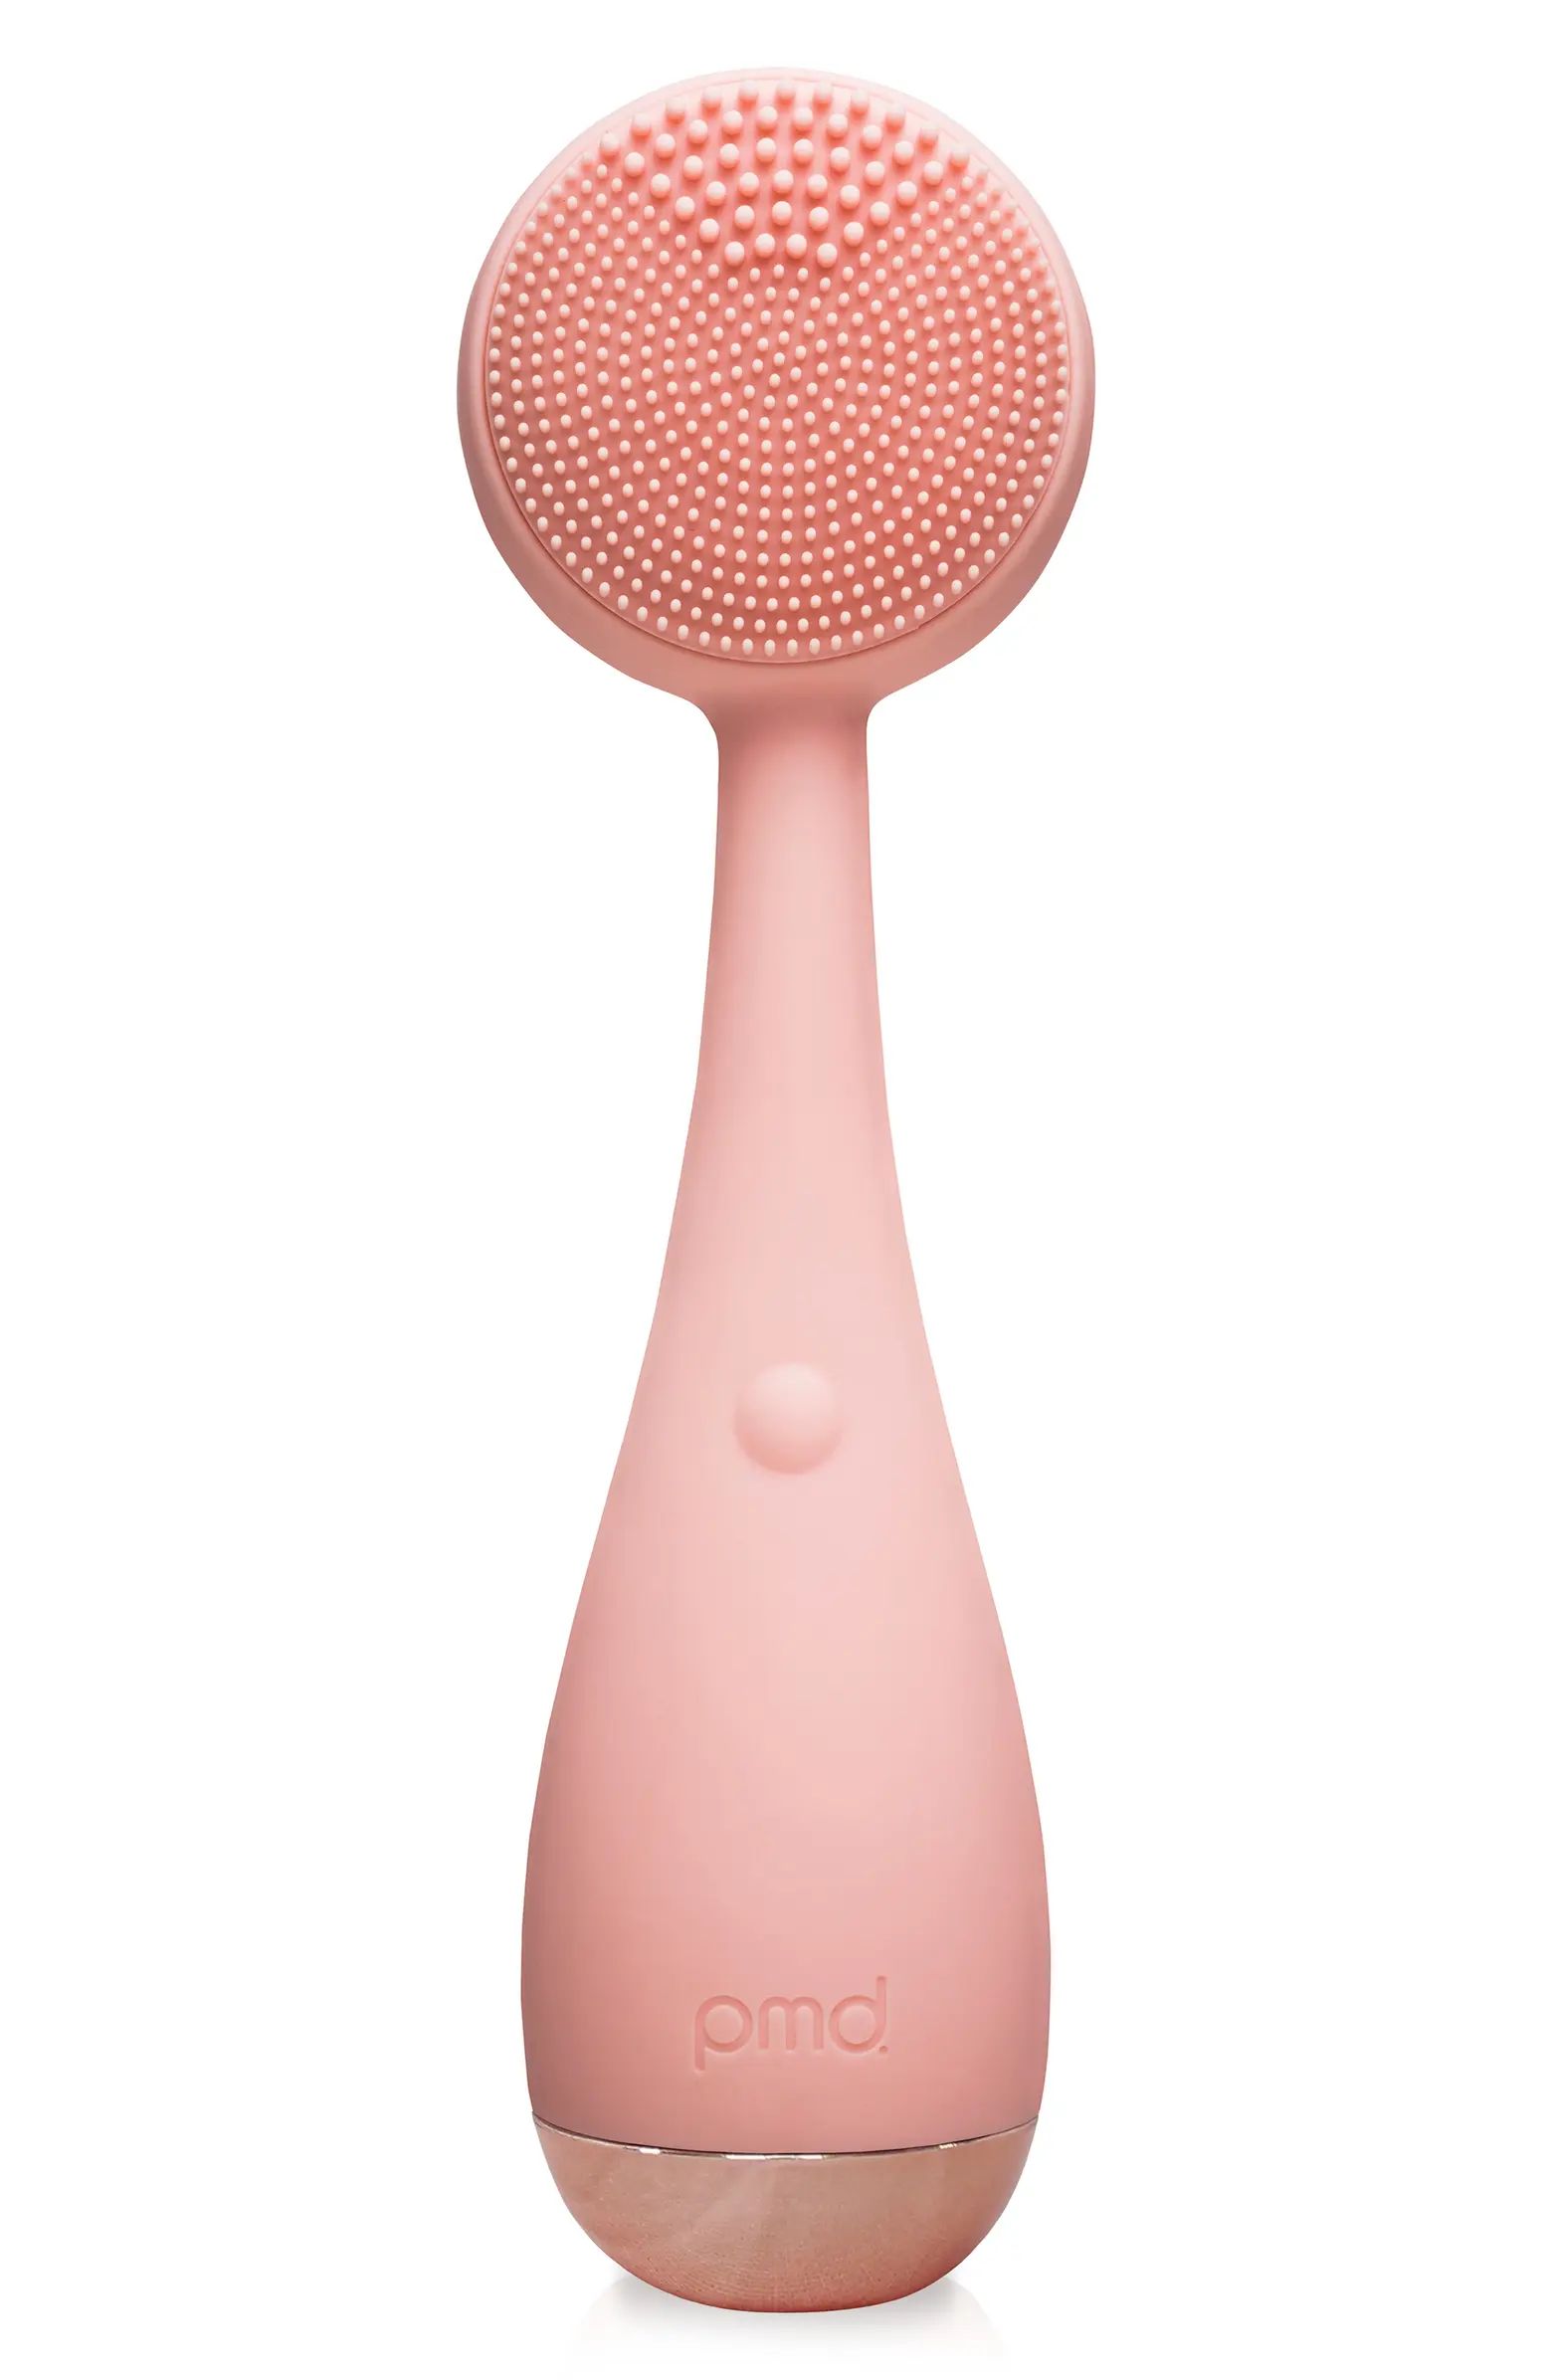 Clean Facial Cleansing Device | Nordstrom